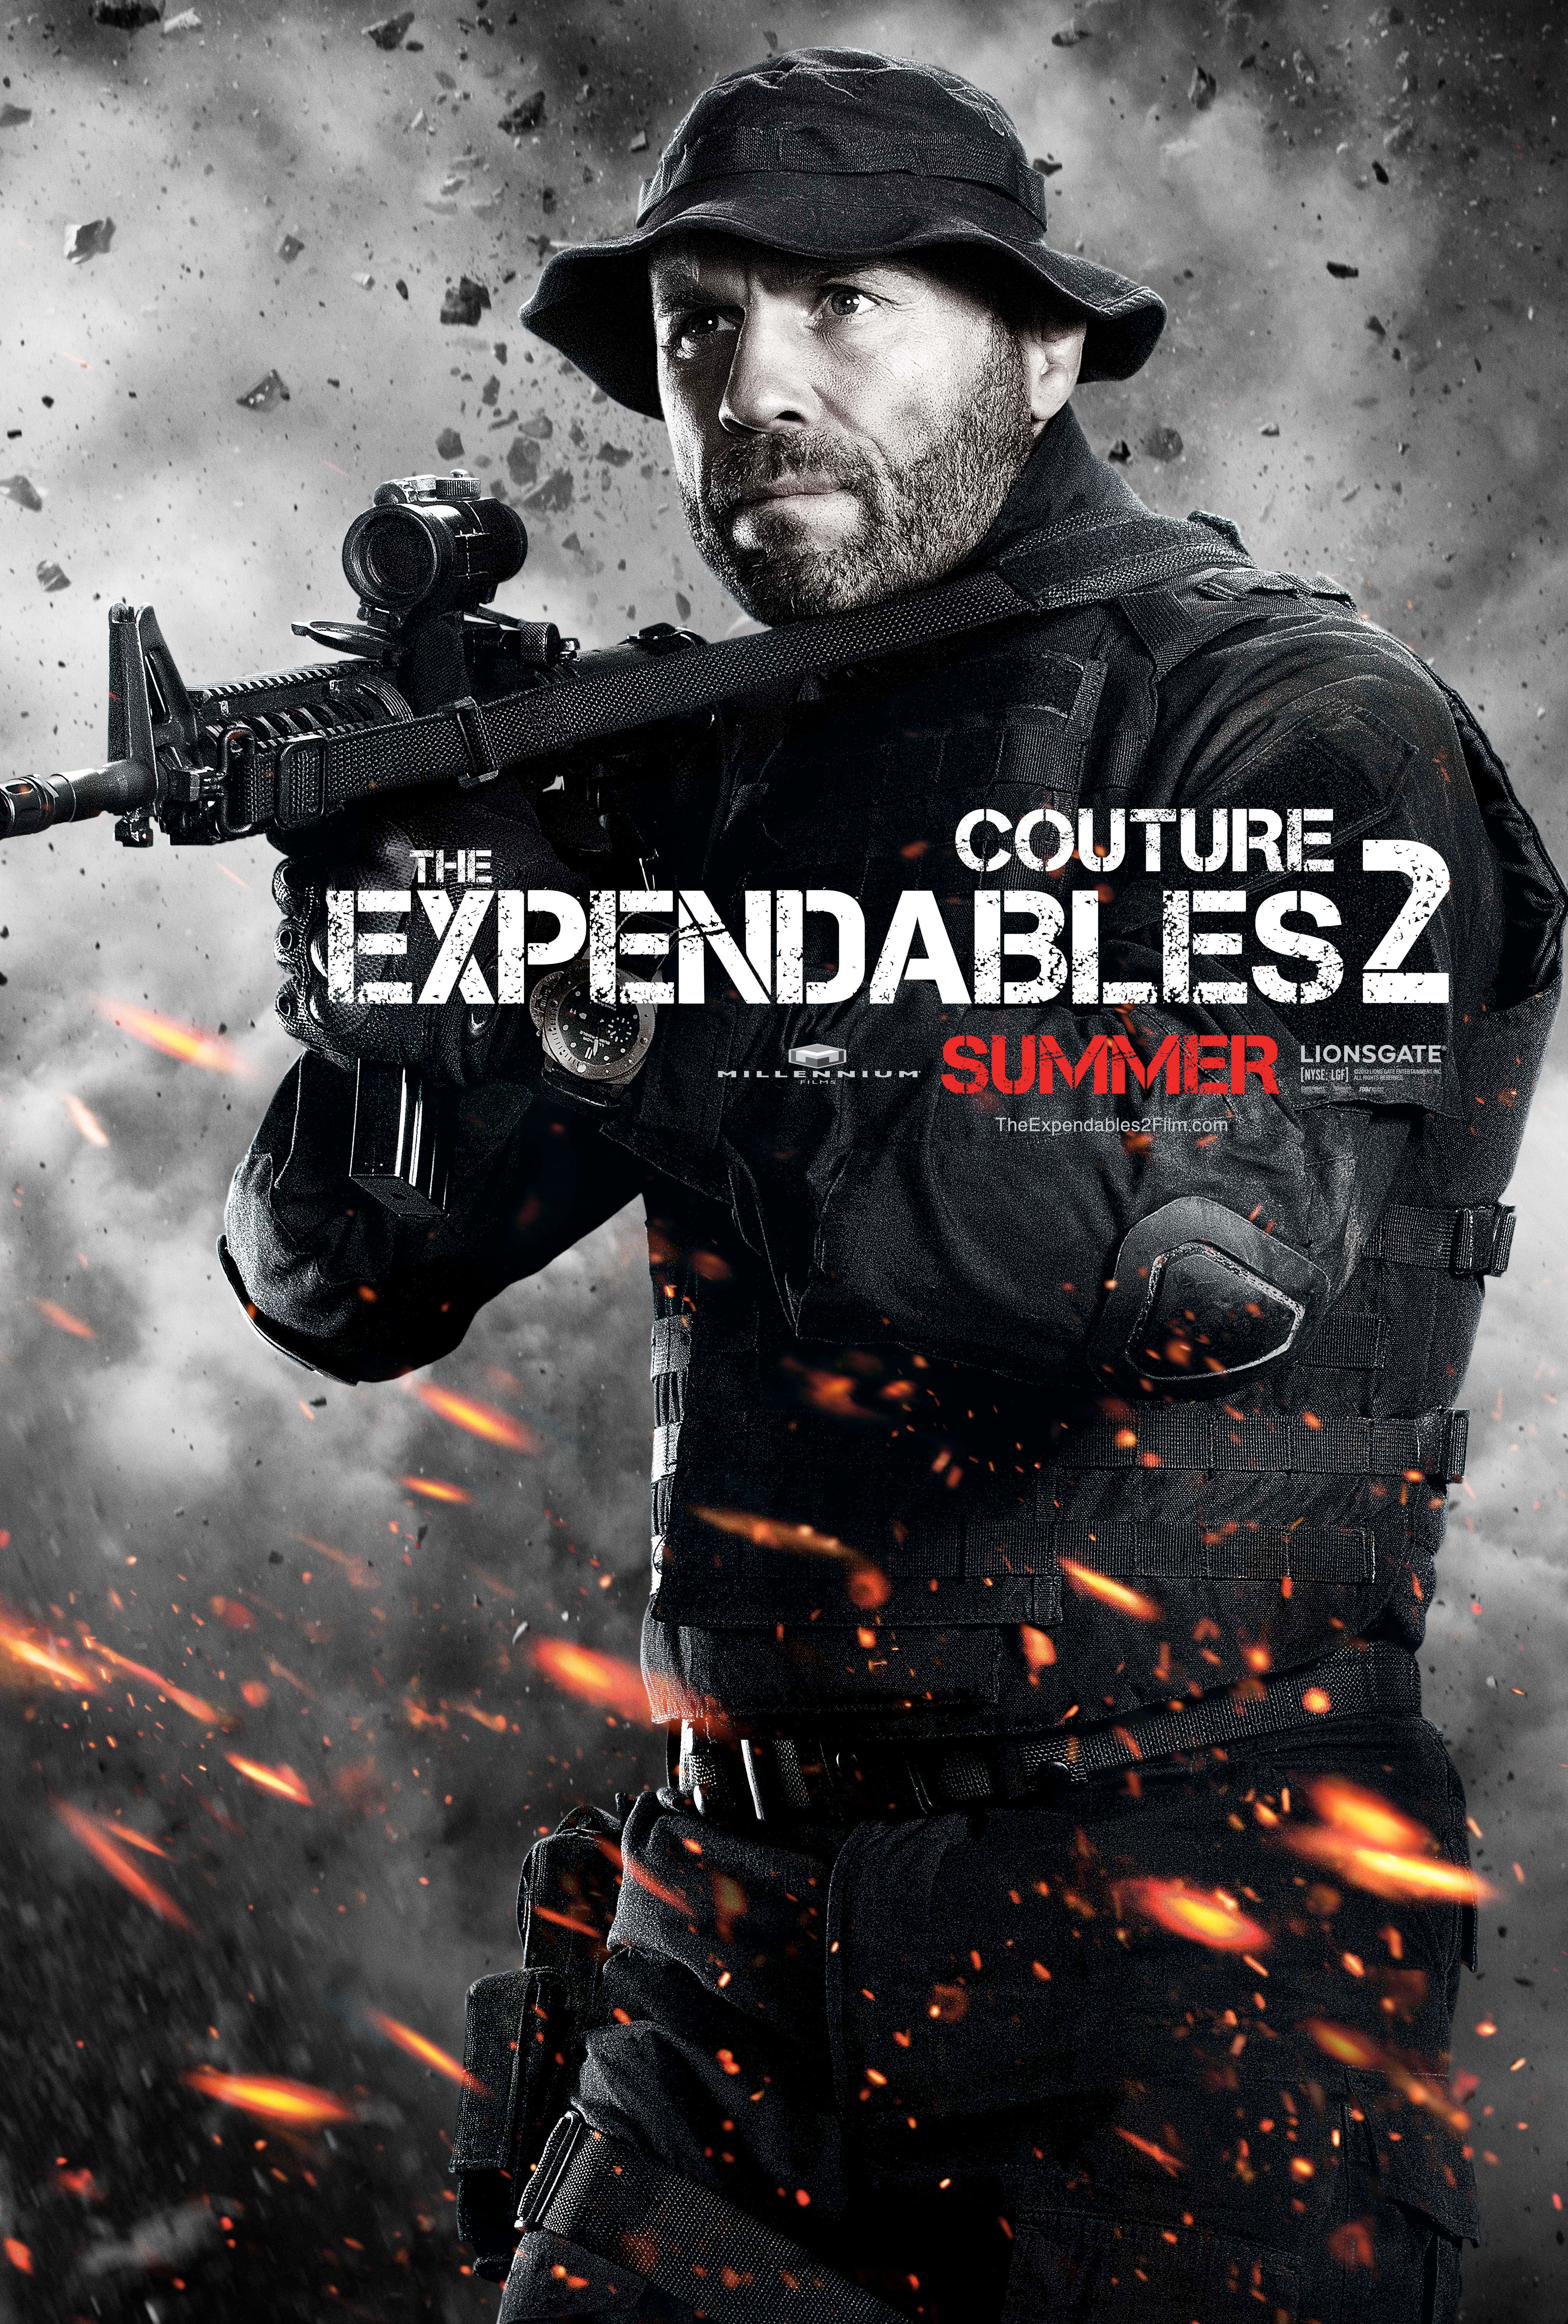 The Expendables 2 Character Poser #7